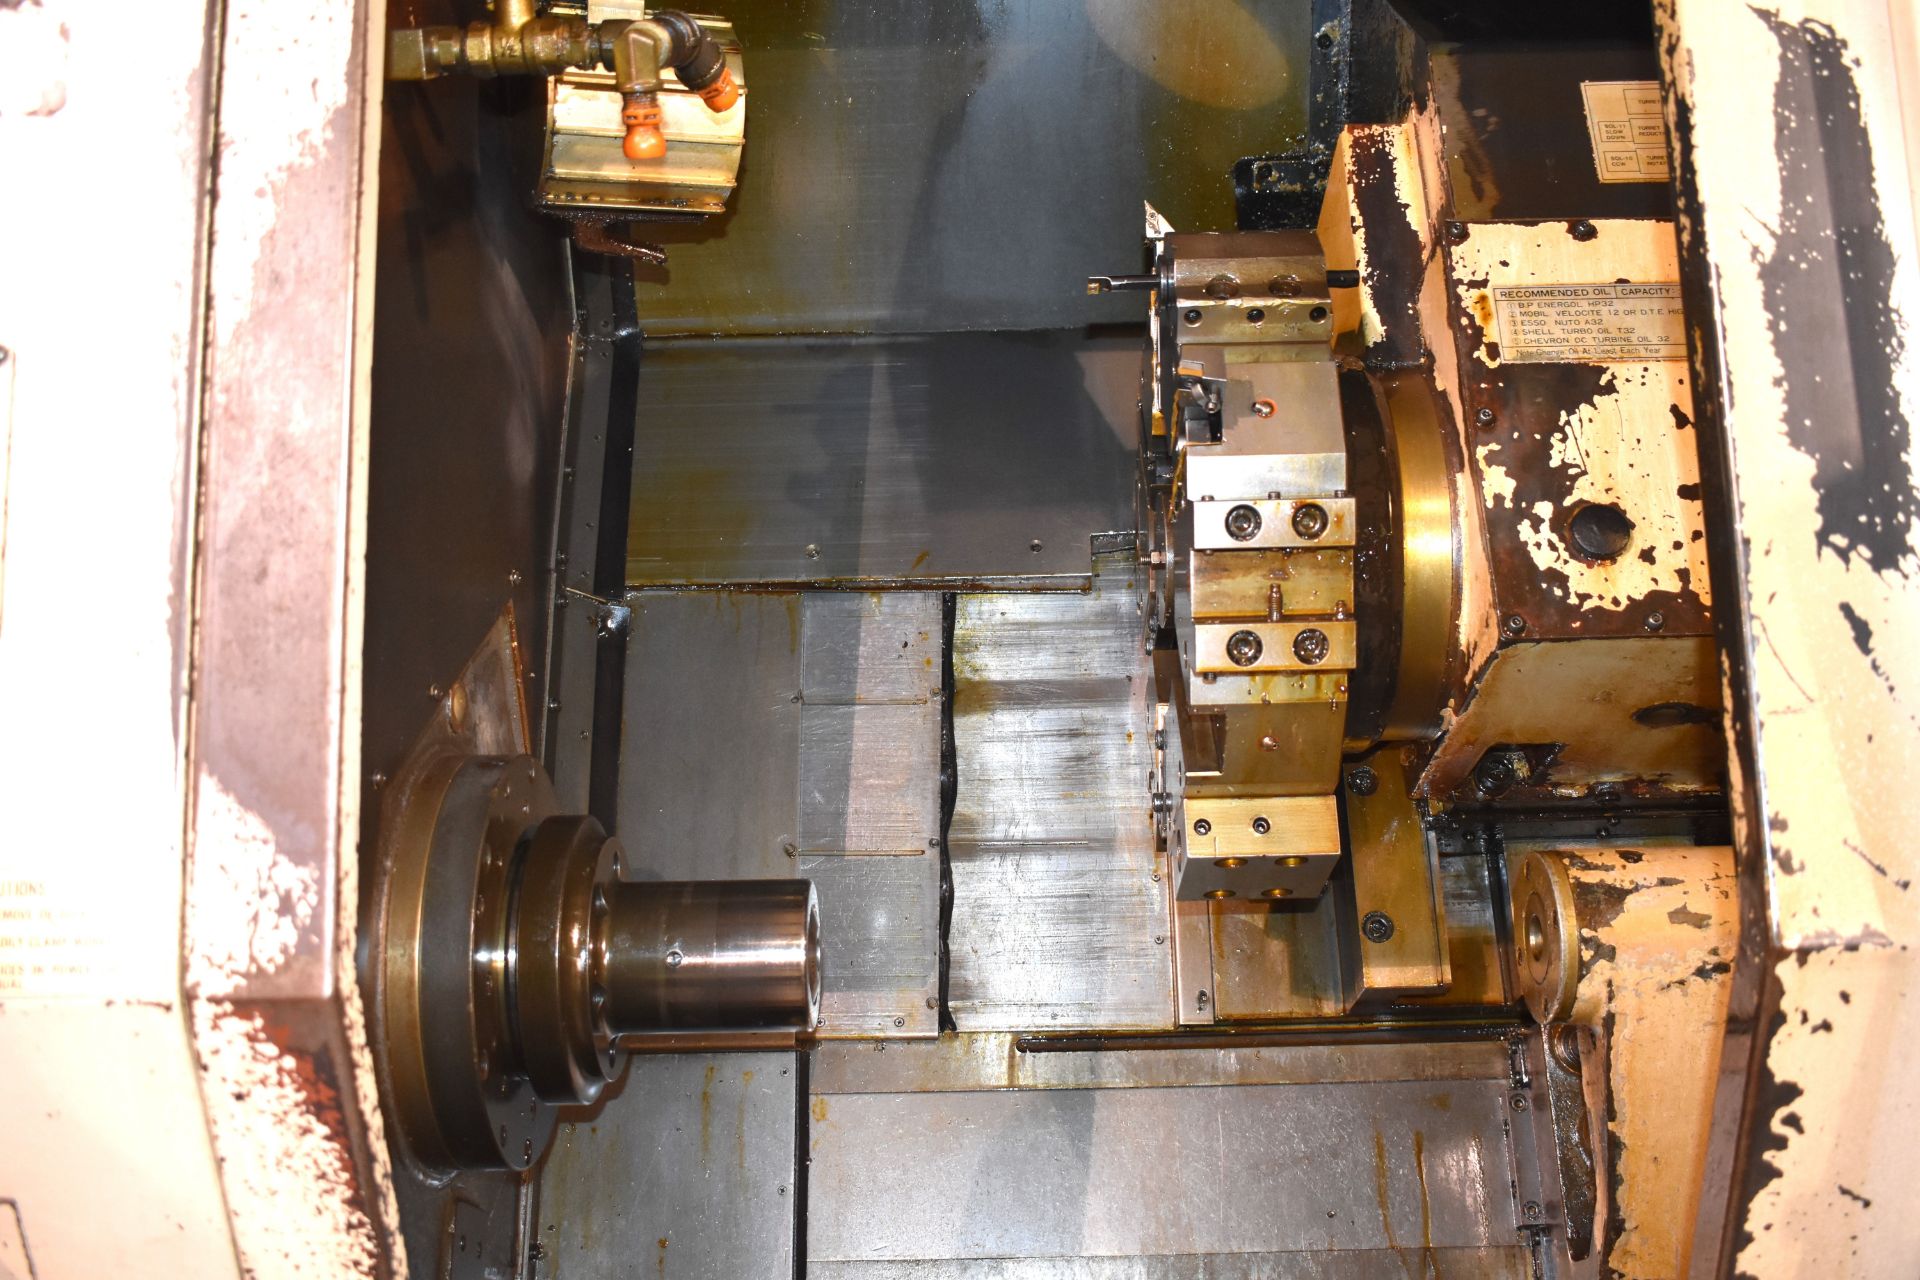 YAM MODEL CK-1A CNC TURNING CENTER; FANUC O-T CONTROL, COLLET CHUCK, 6" 3-JAW CHUCK, TAILSTOCK, CHIP - Image 3 of 5